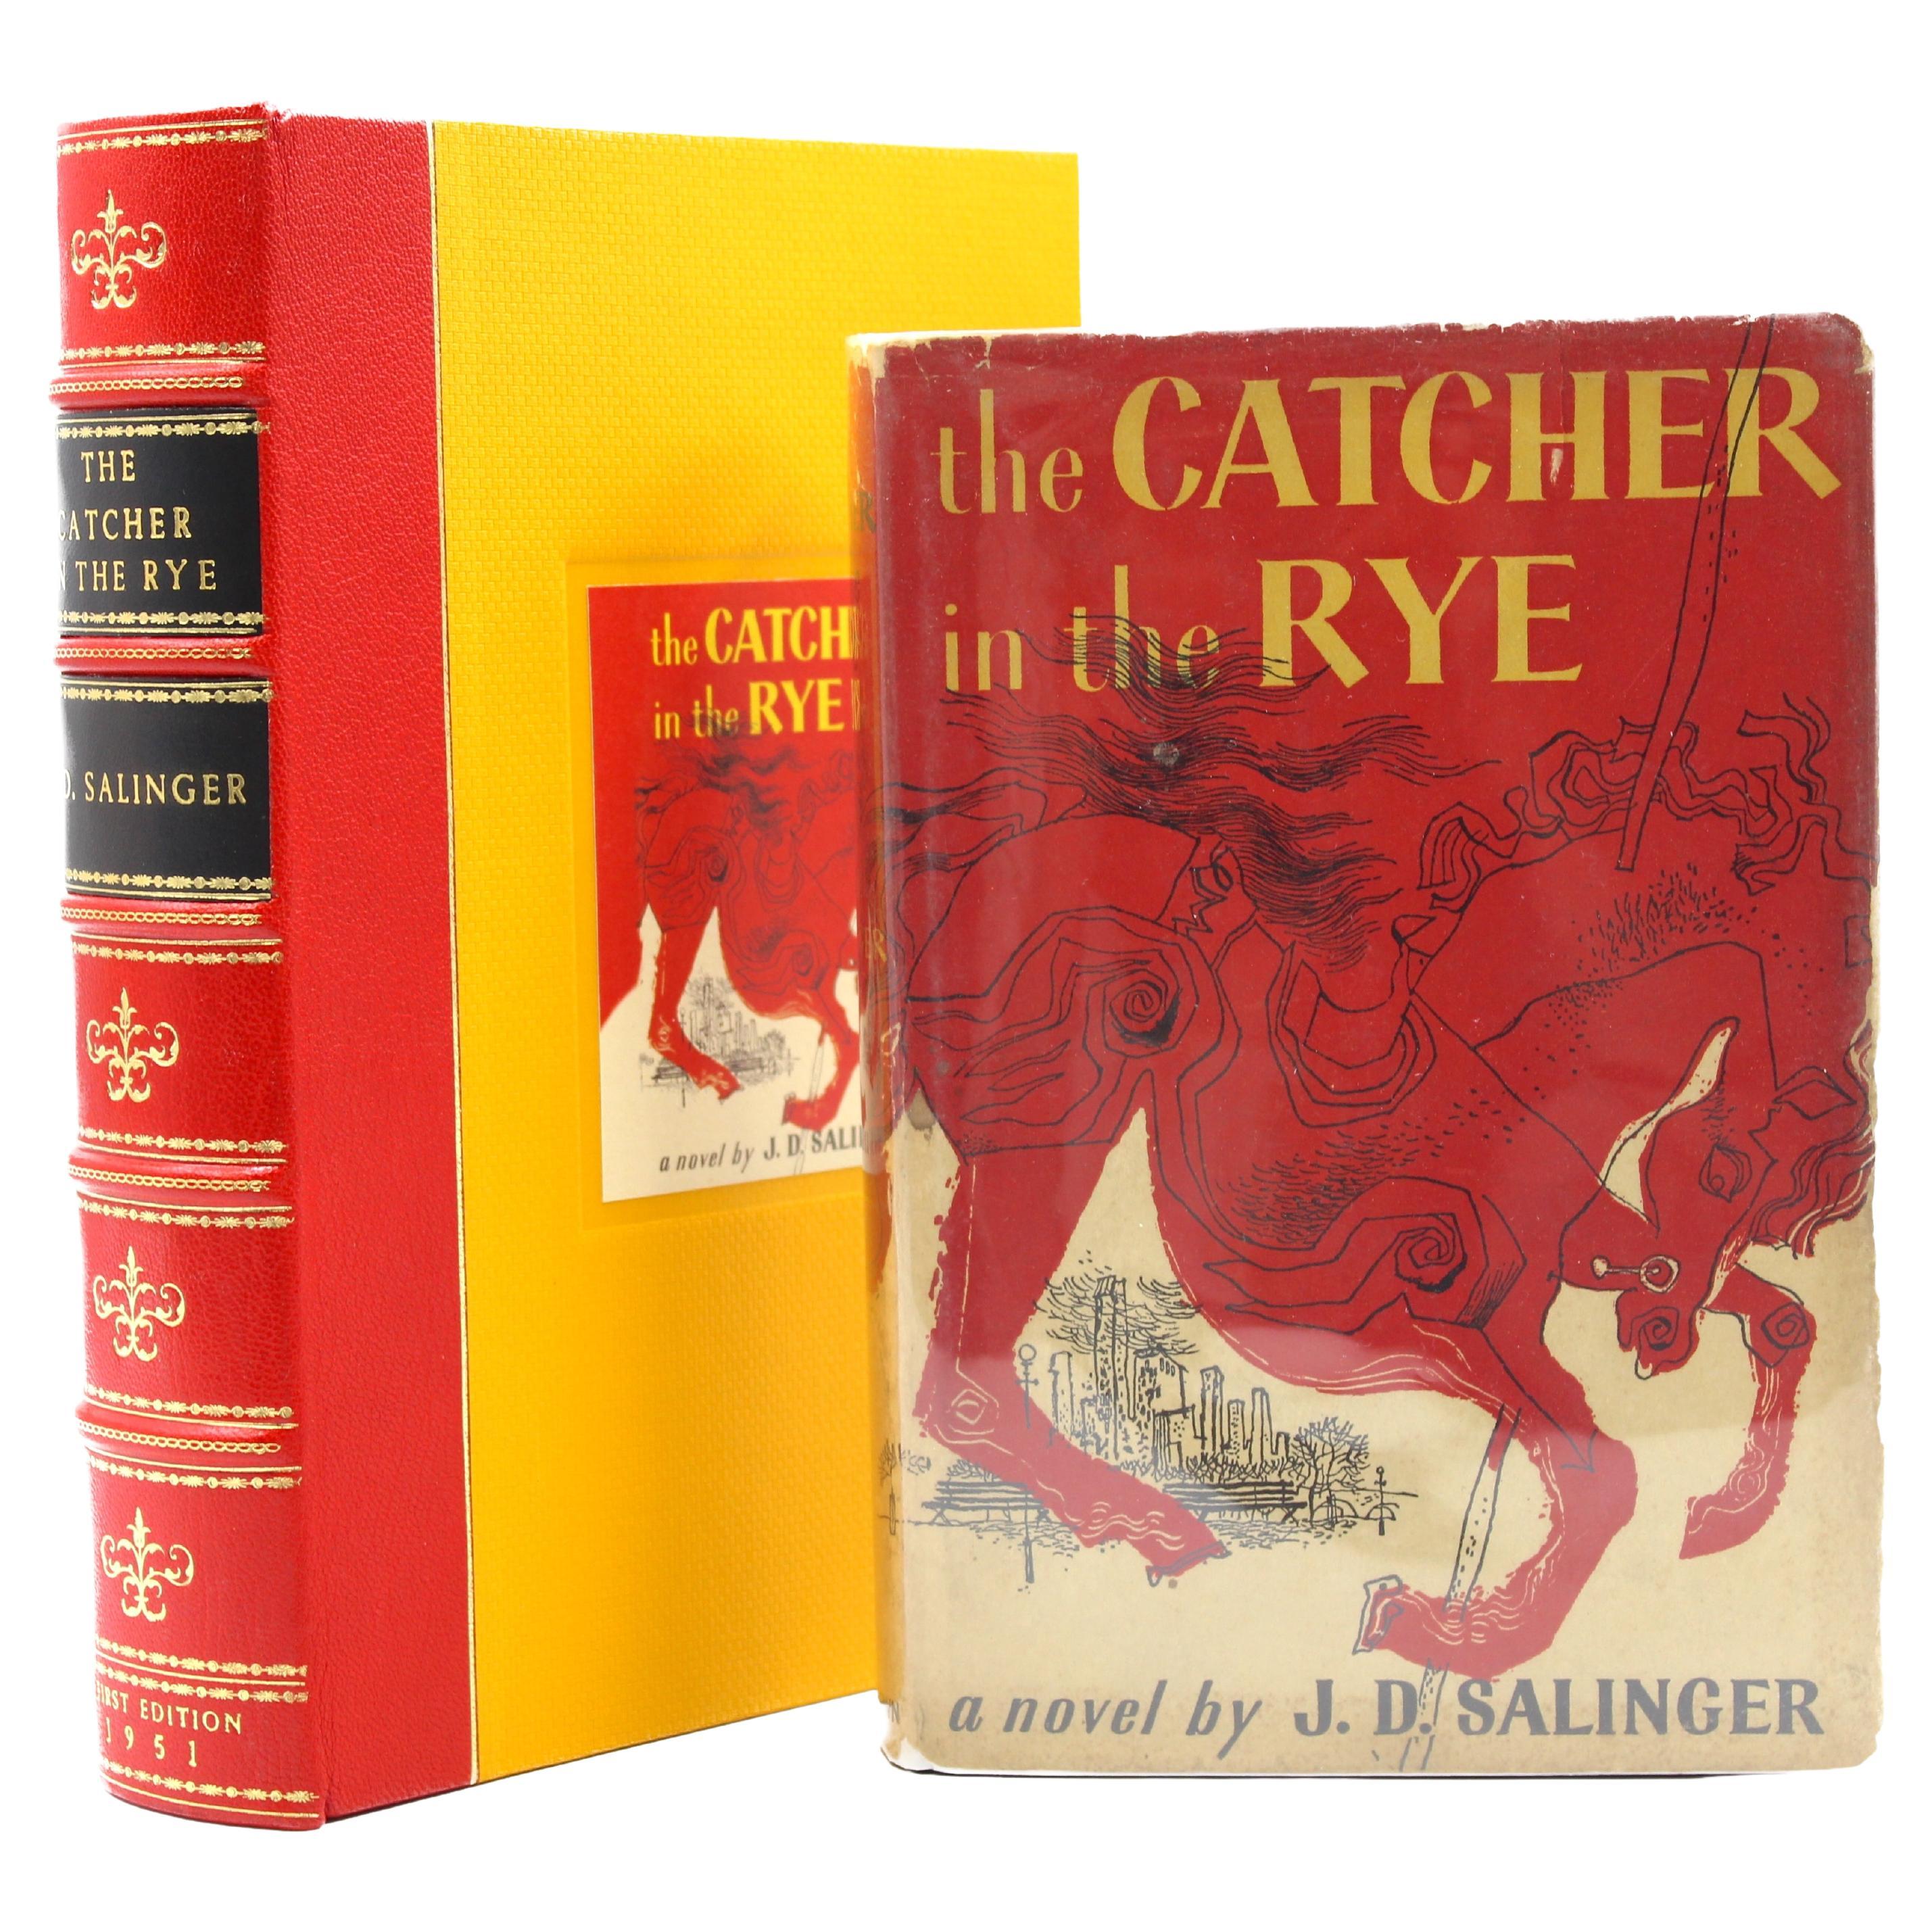 Catcher in the Rye by J.D. Salinger, First Edition, in Dust Jacket, 1951